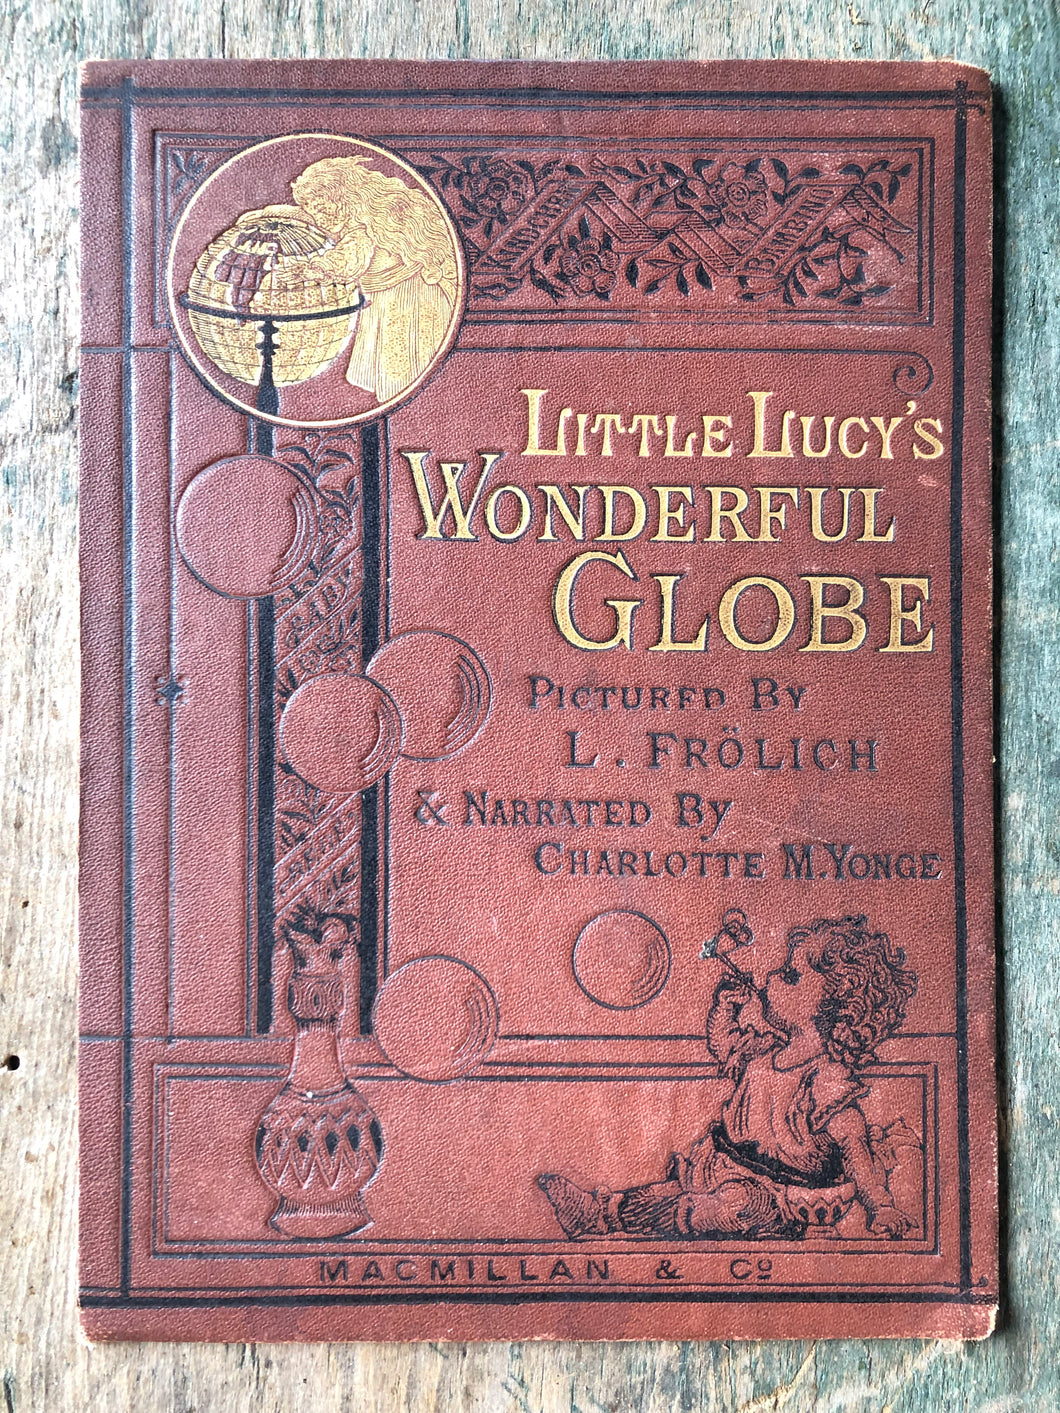 Cover of “Little Lucy’s Wonderful Globe”